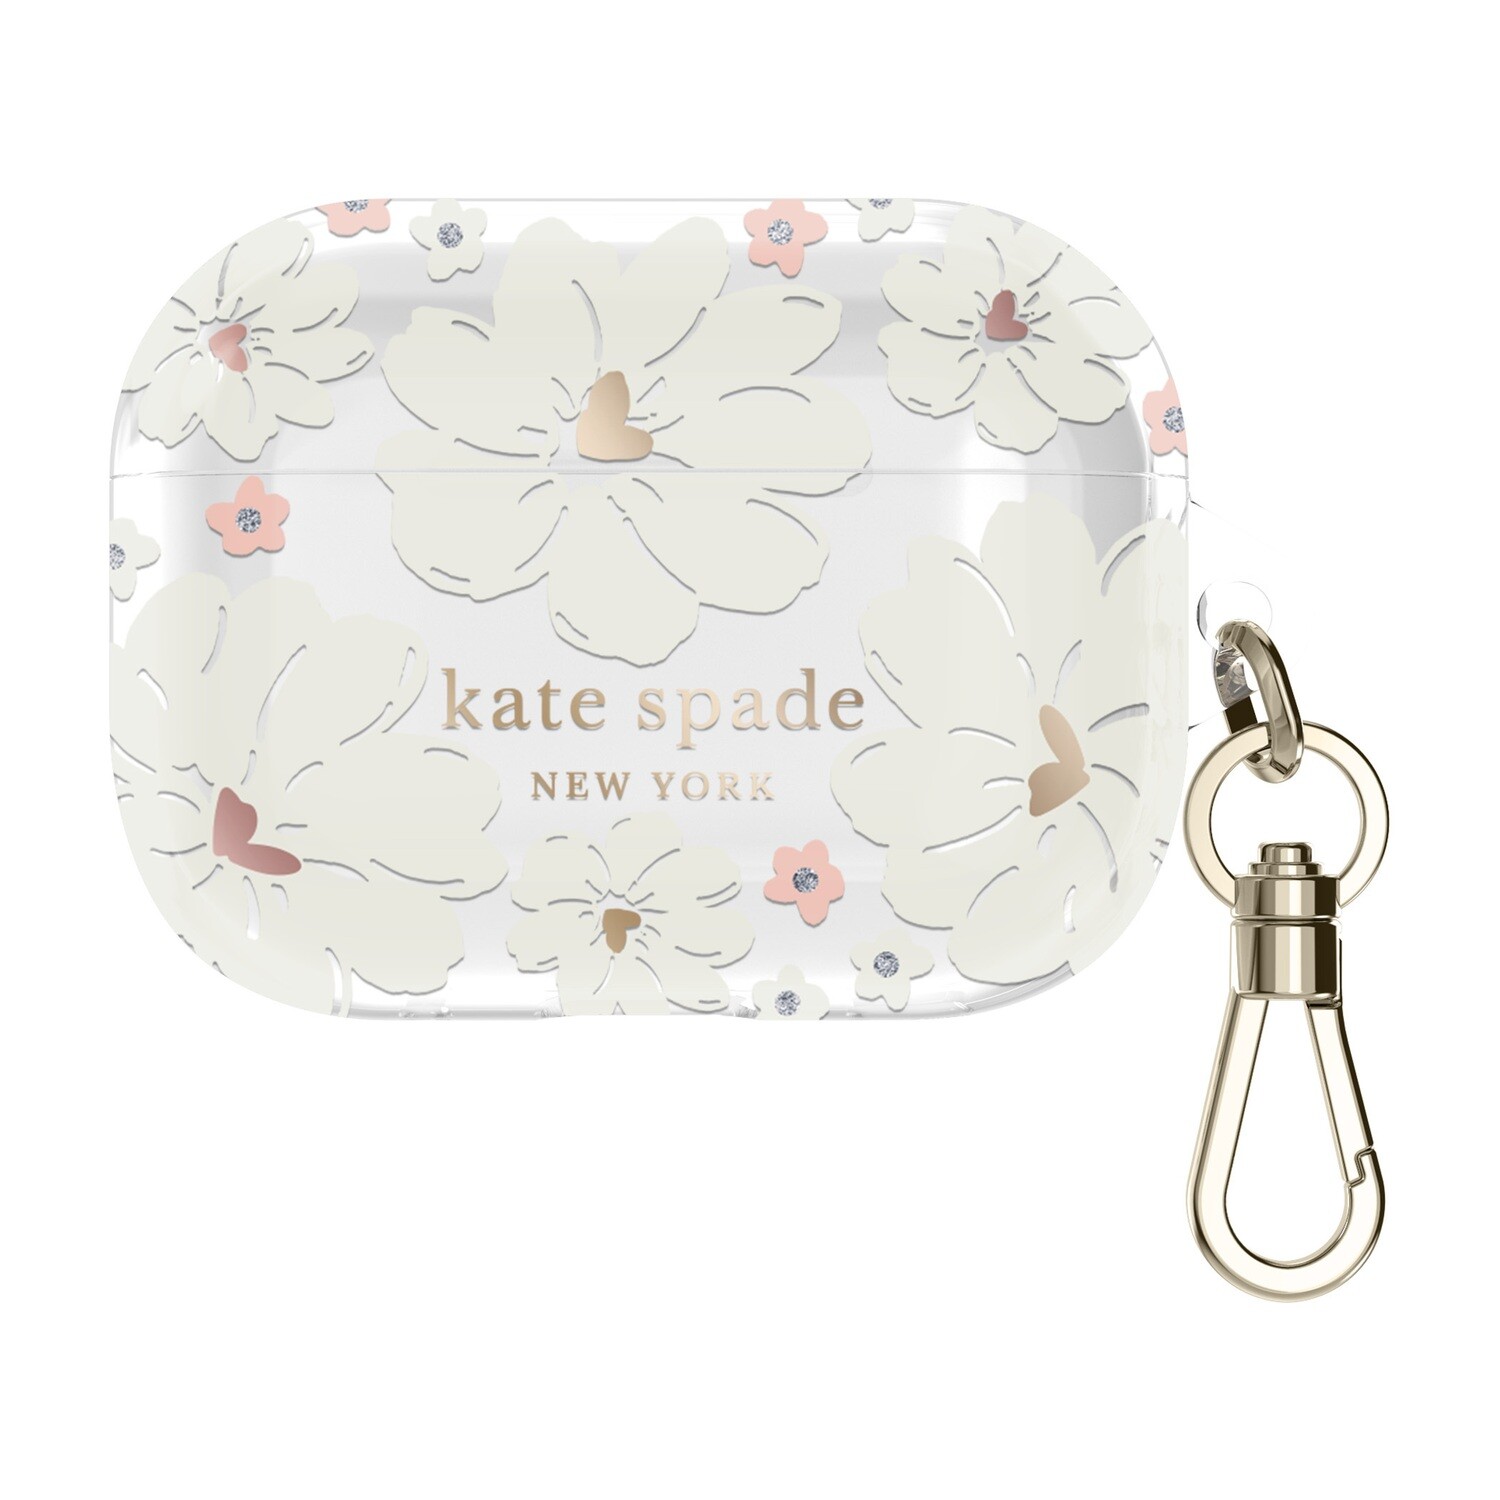 Official Kate Spade Retailer in Singapore | The Digital Gadgets